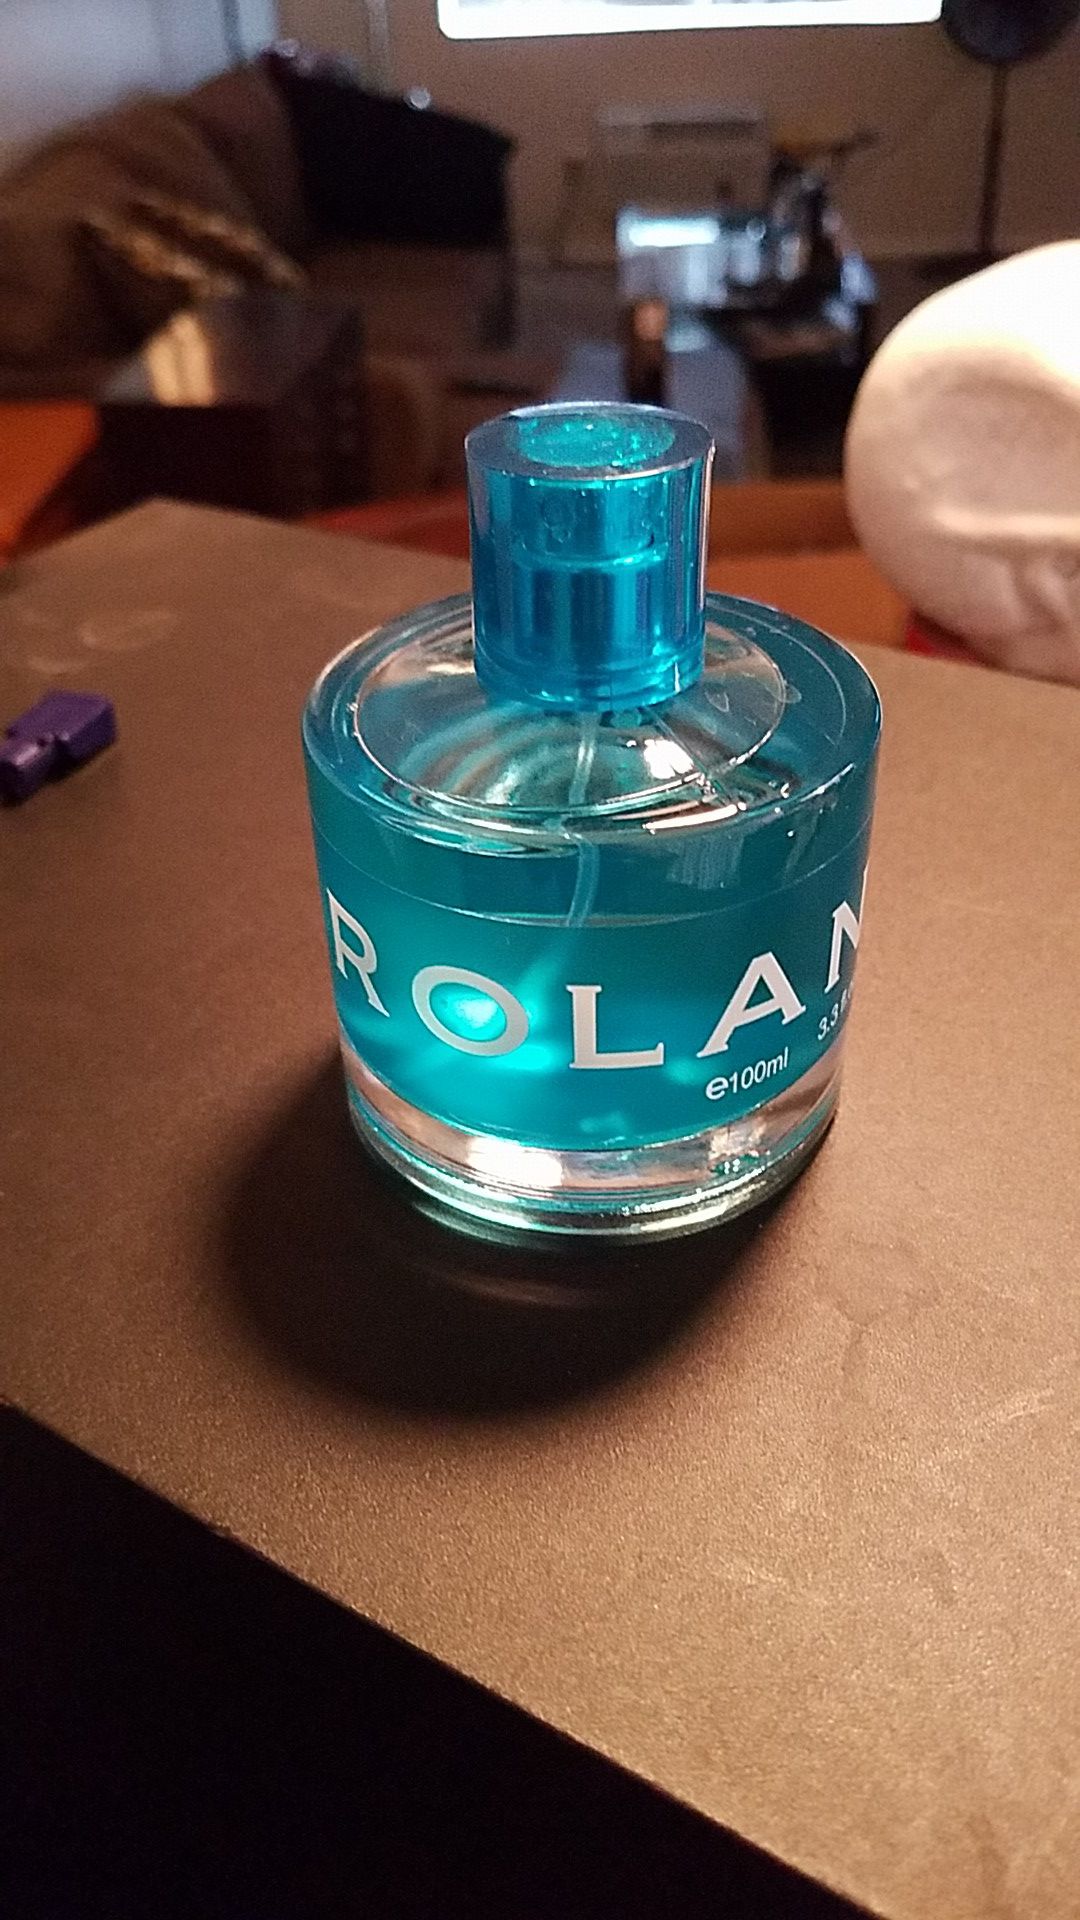 Rolan perfume for Sale in Santa Ana, CA - OfferUp